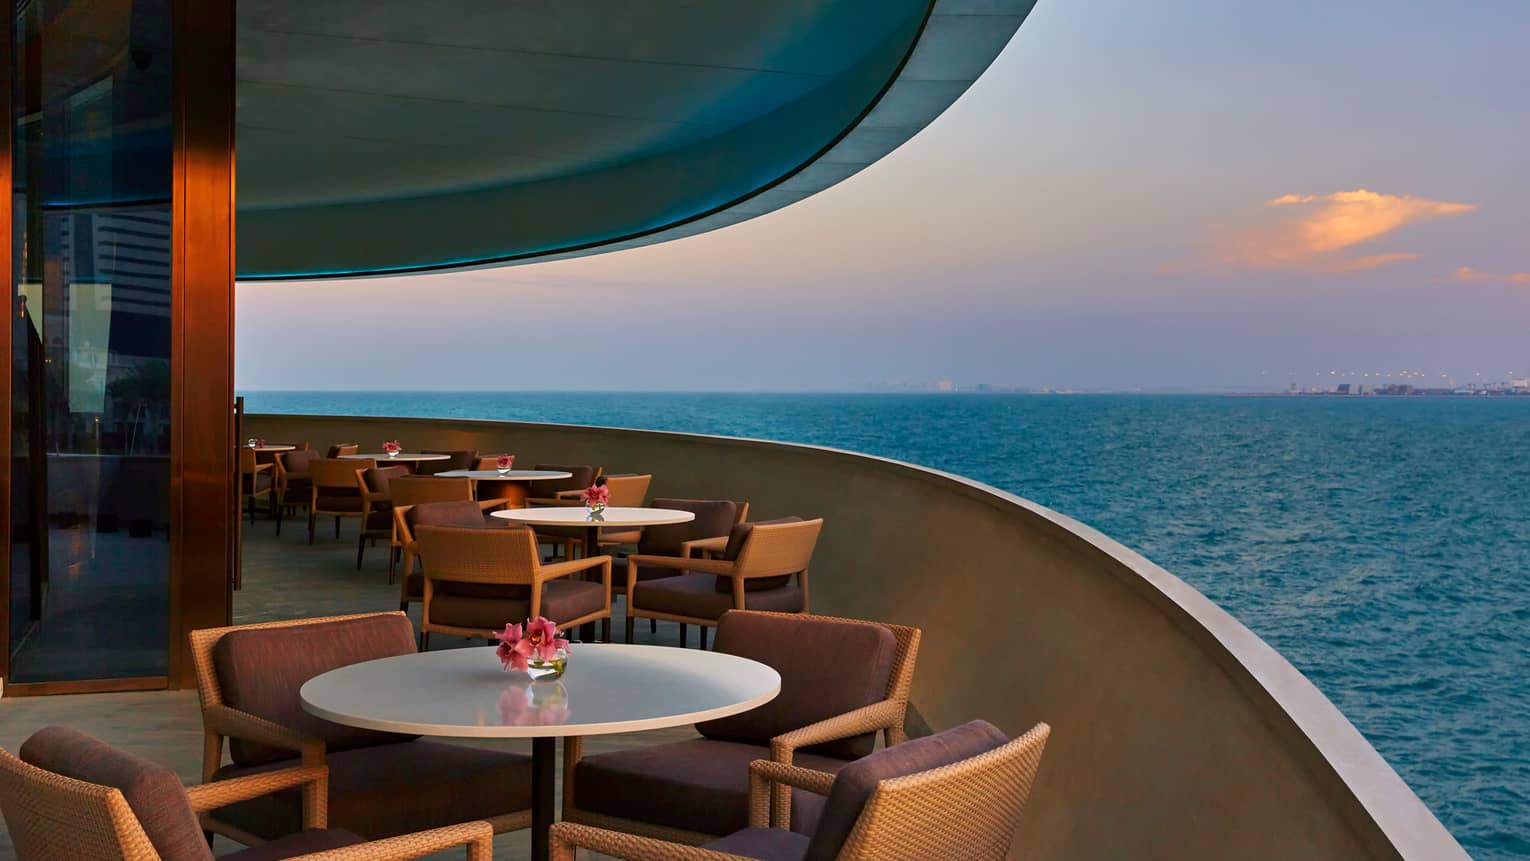 Dining tables on curved patio of Noby Restaurant, overlooking blue sea